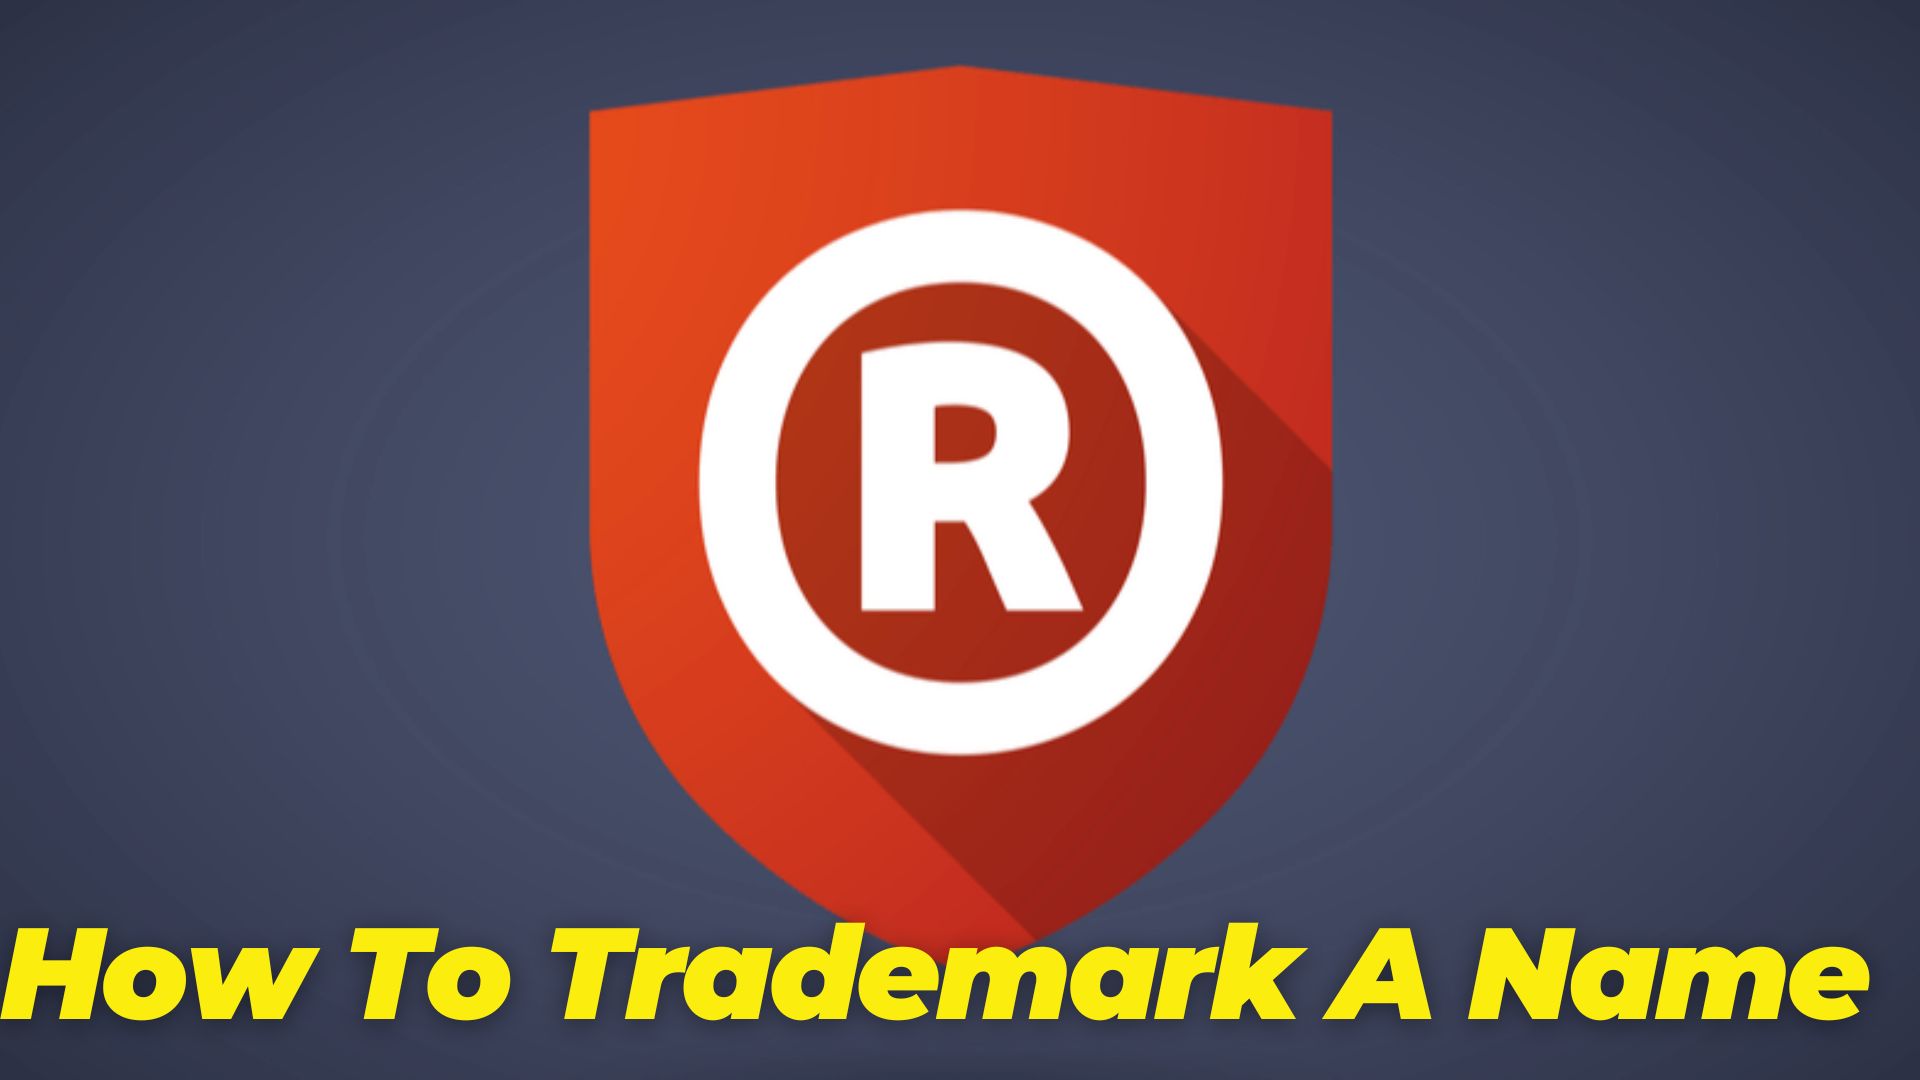 How To Trademark A Name?